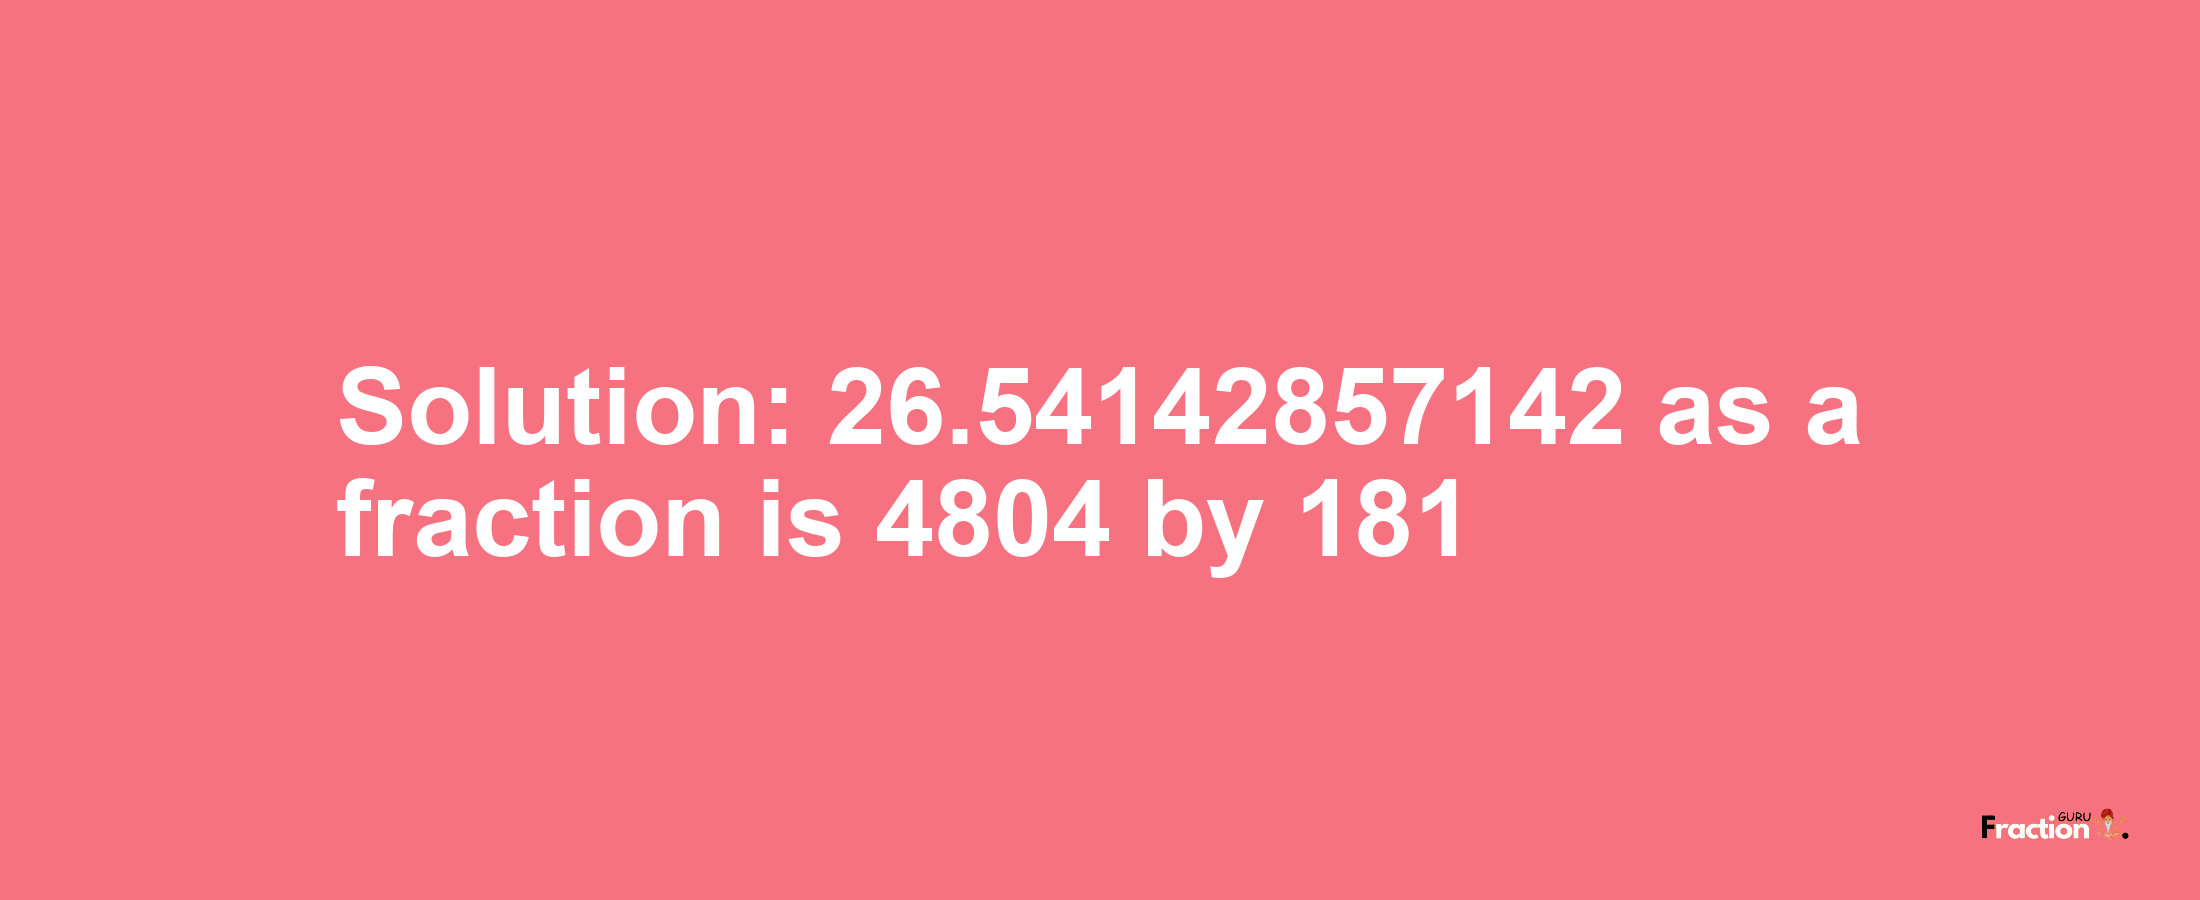 Solution:26.54142857142 as a fraction is 4804/181